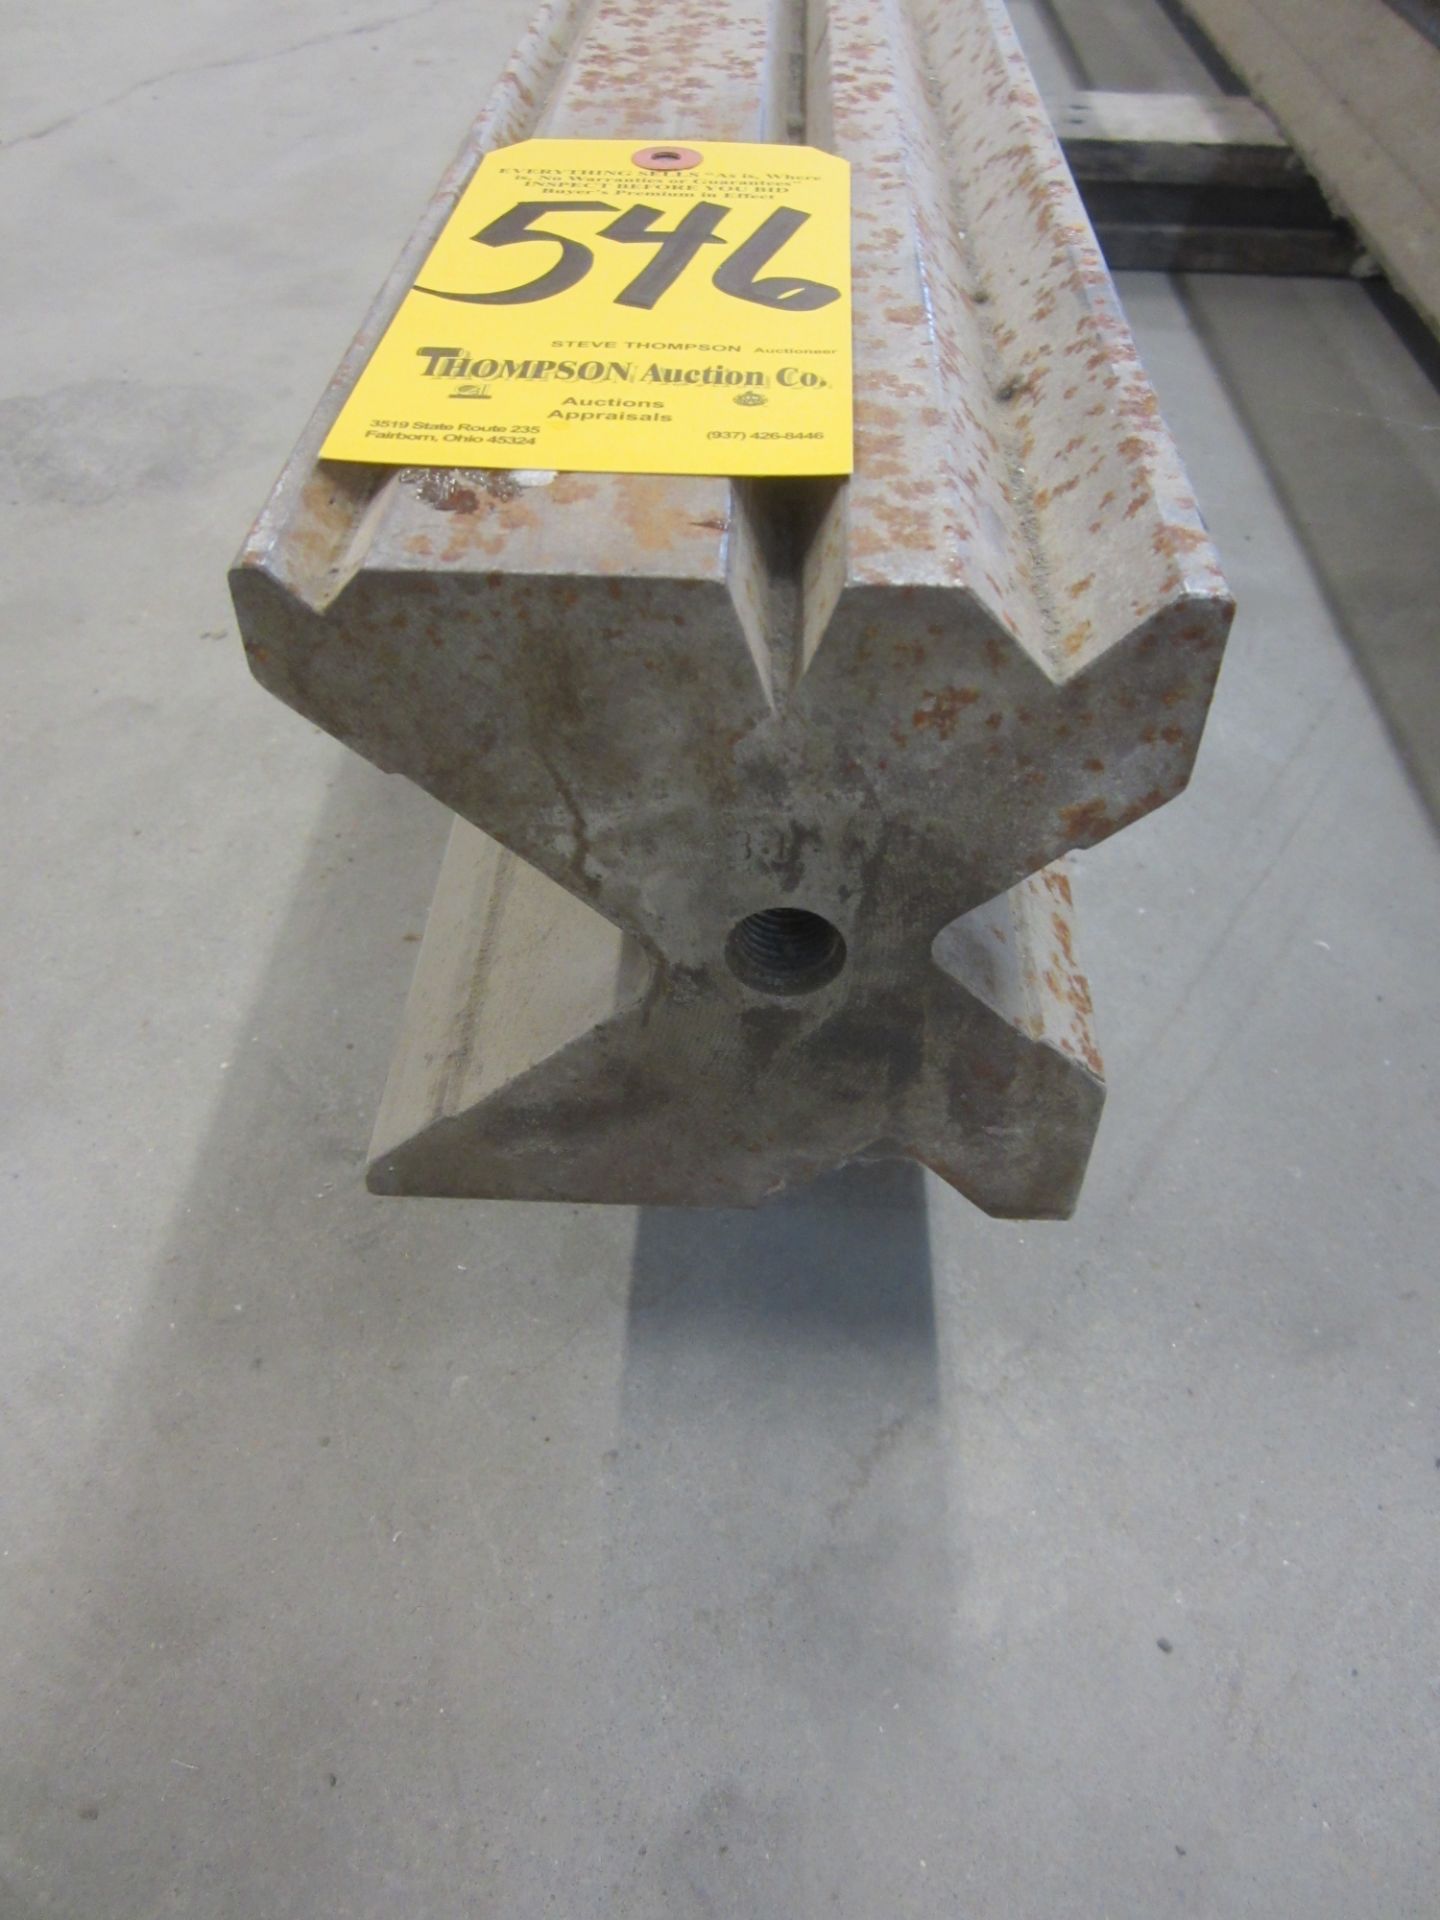 6-Way Die, 5" Square X 13'5" Long with 4", 2 1/2", 1 1/2", 1", and 1/2" 90 Degree Openings, and 5/8"